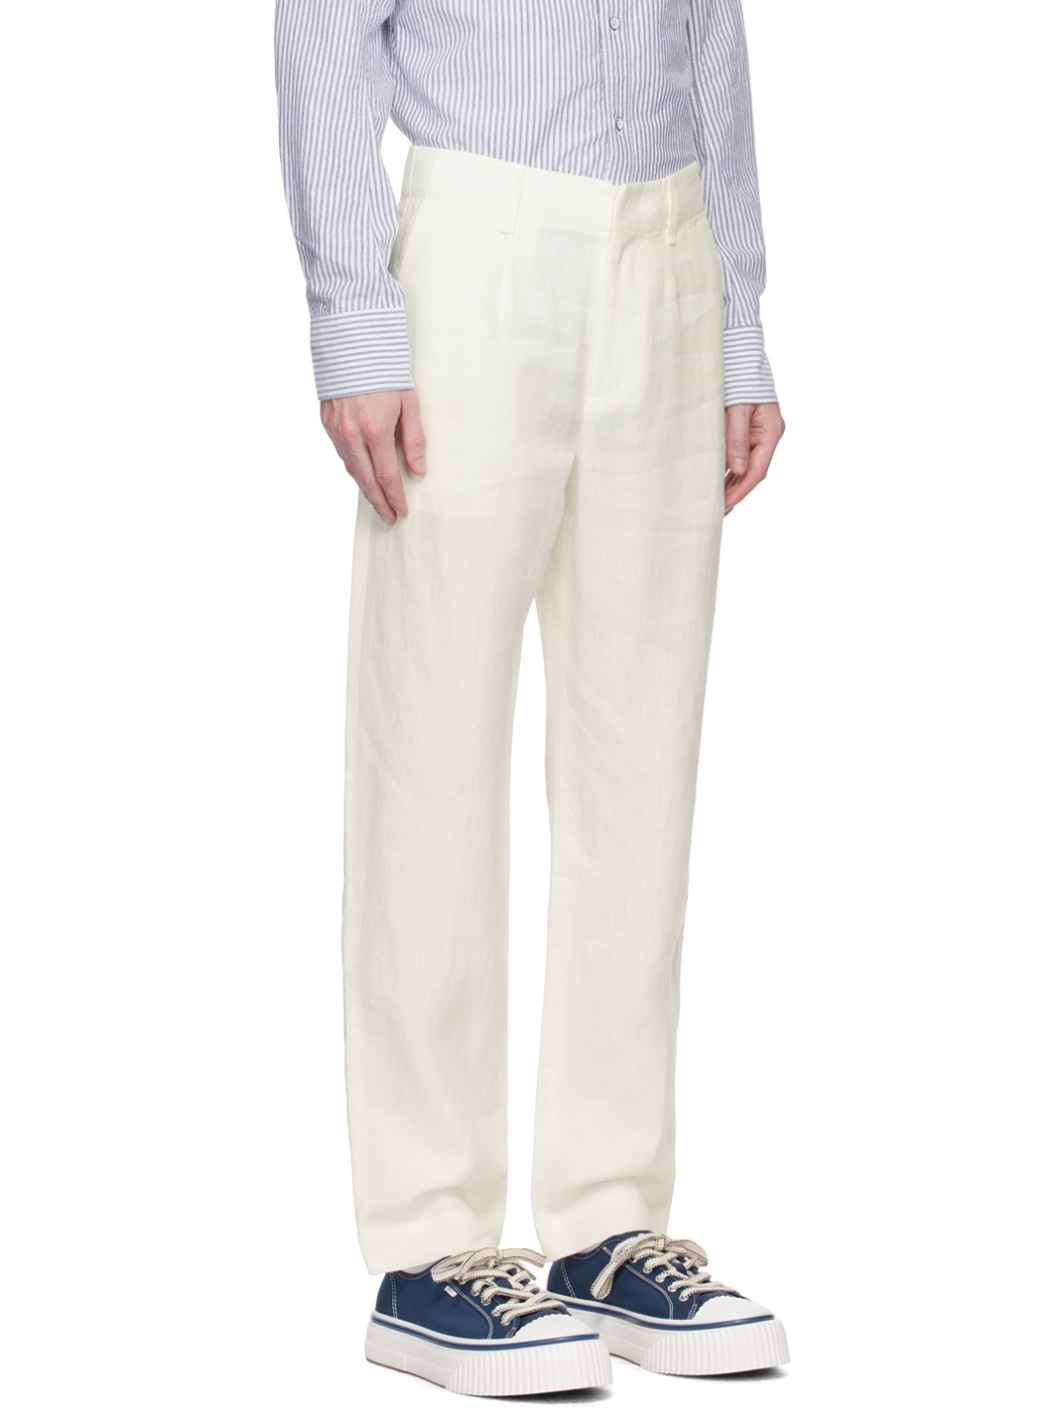 Off-White Slim-Fit Trousers - 2